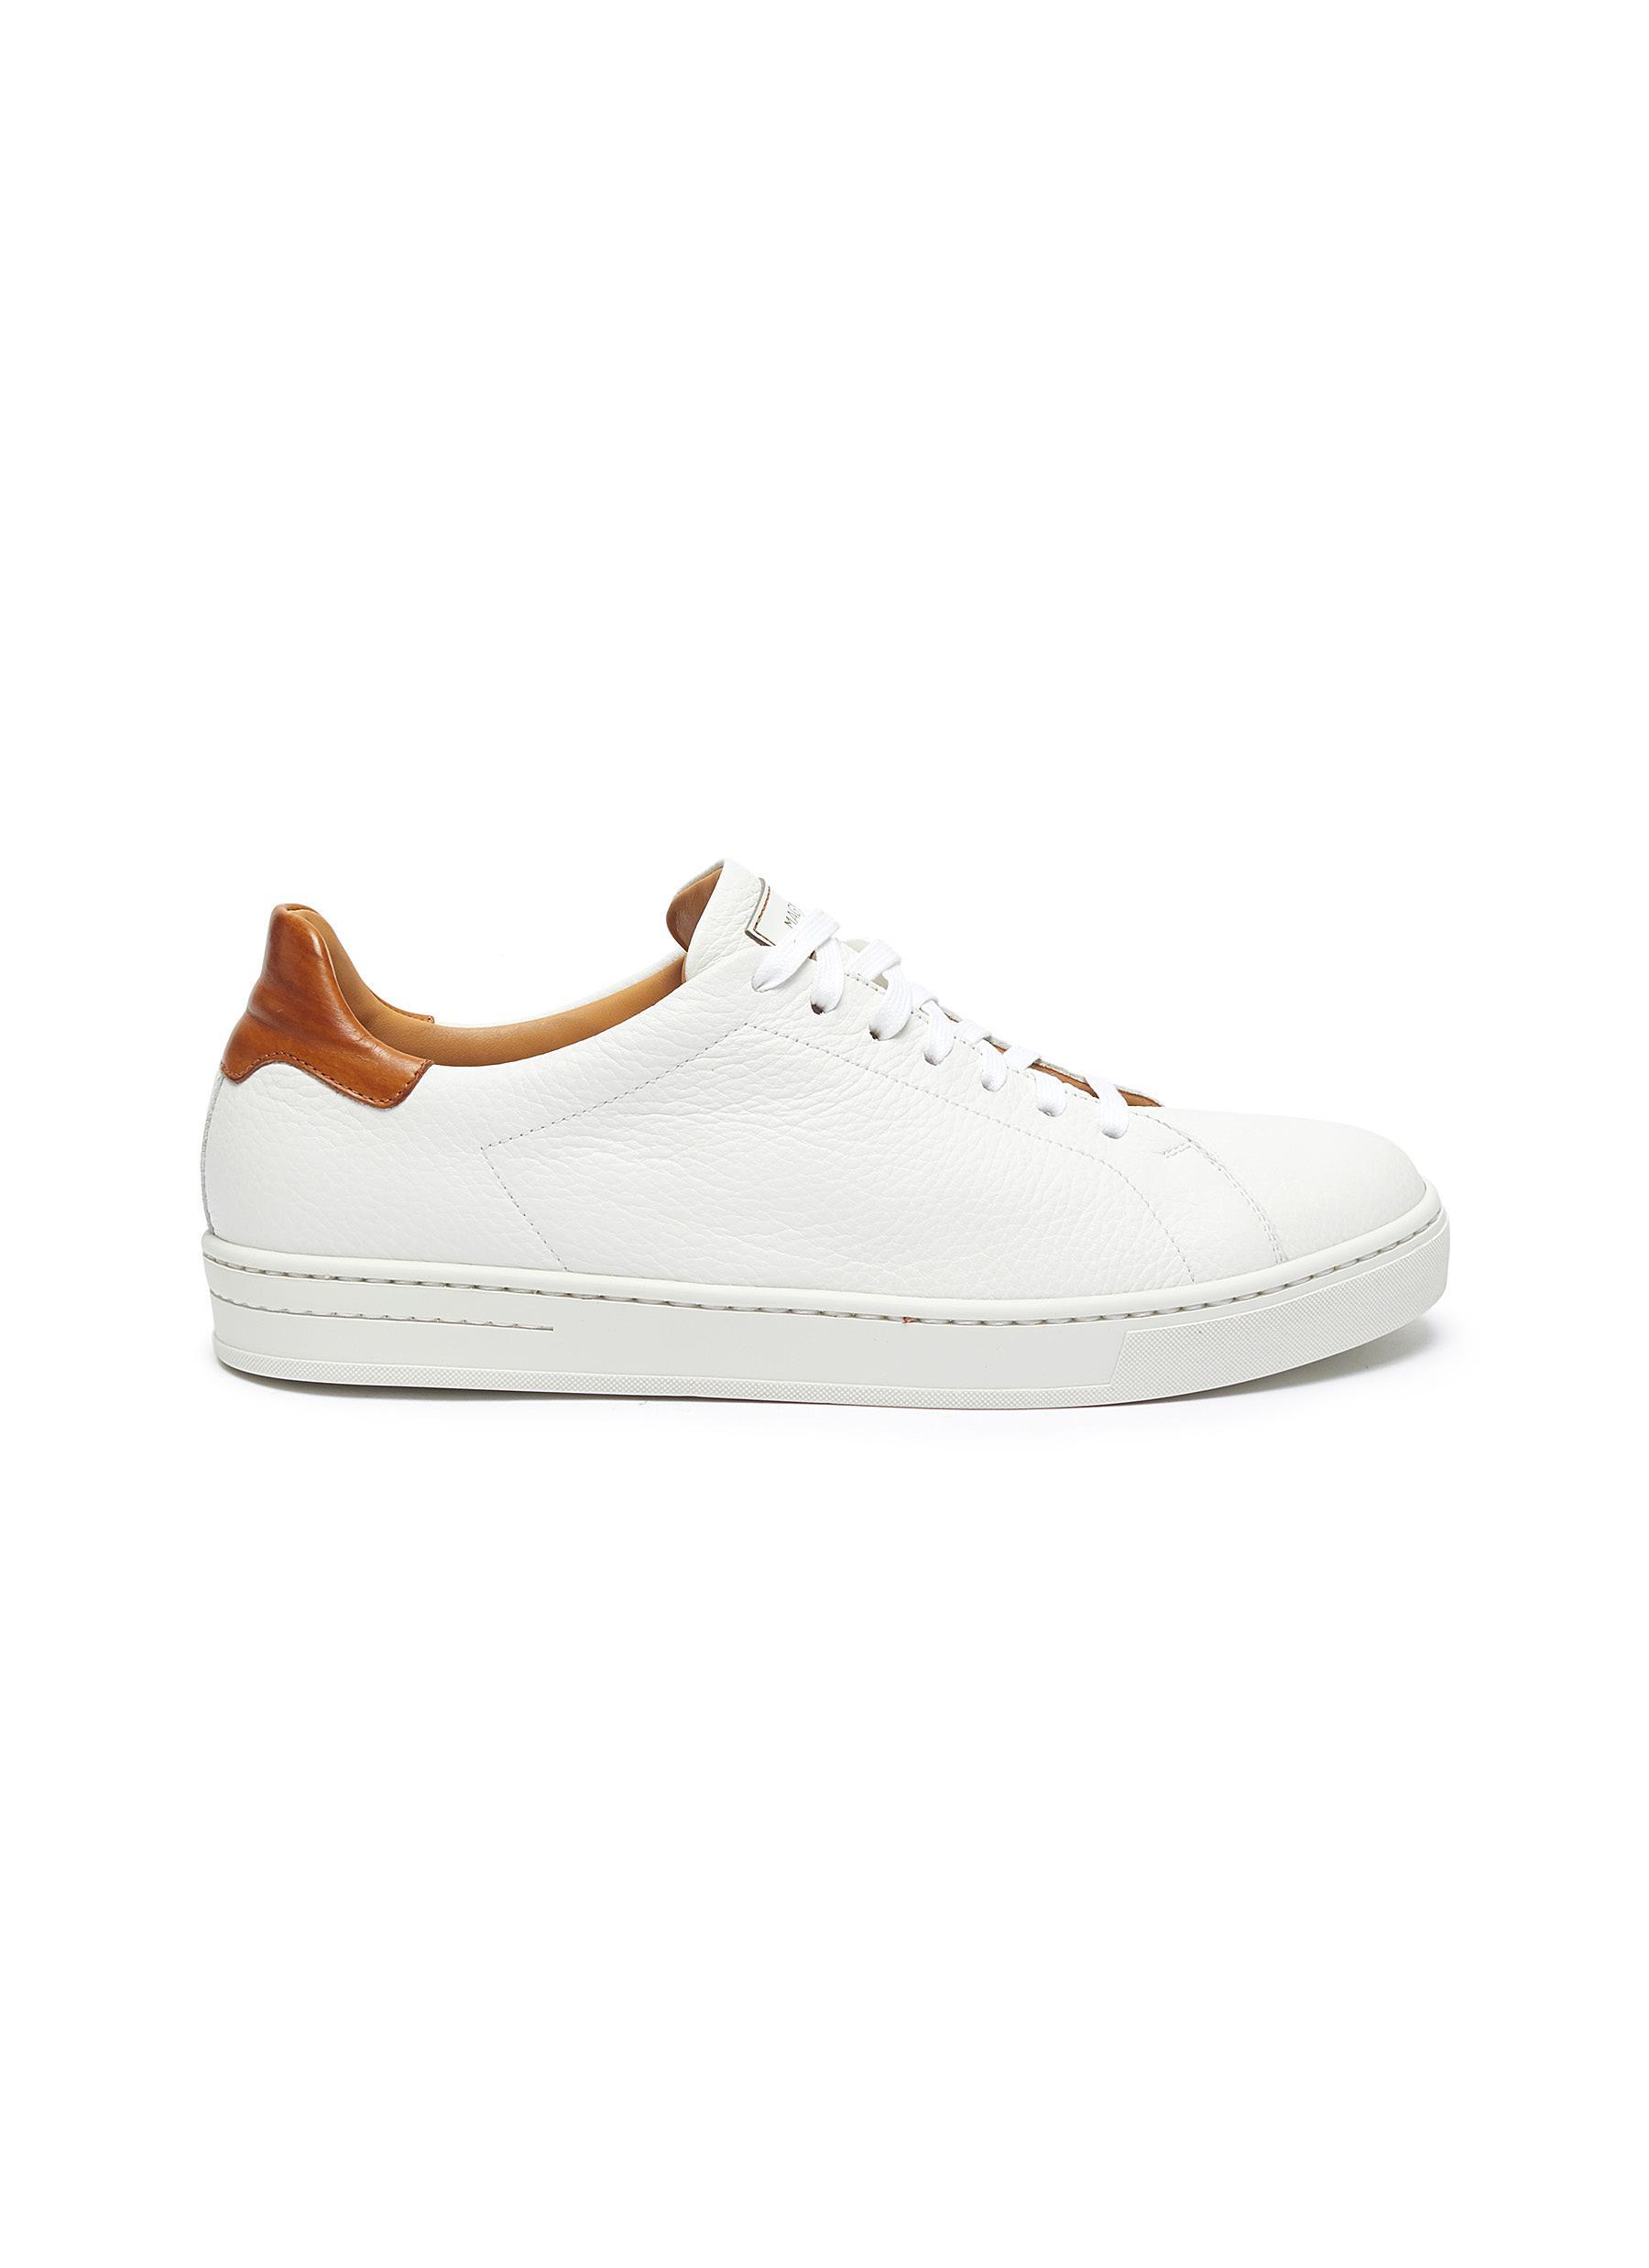 Magnanni 'opanca' Low Top Grain Leather Sneakers in Brown (White) for ...